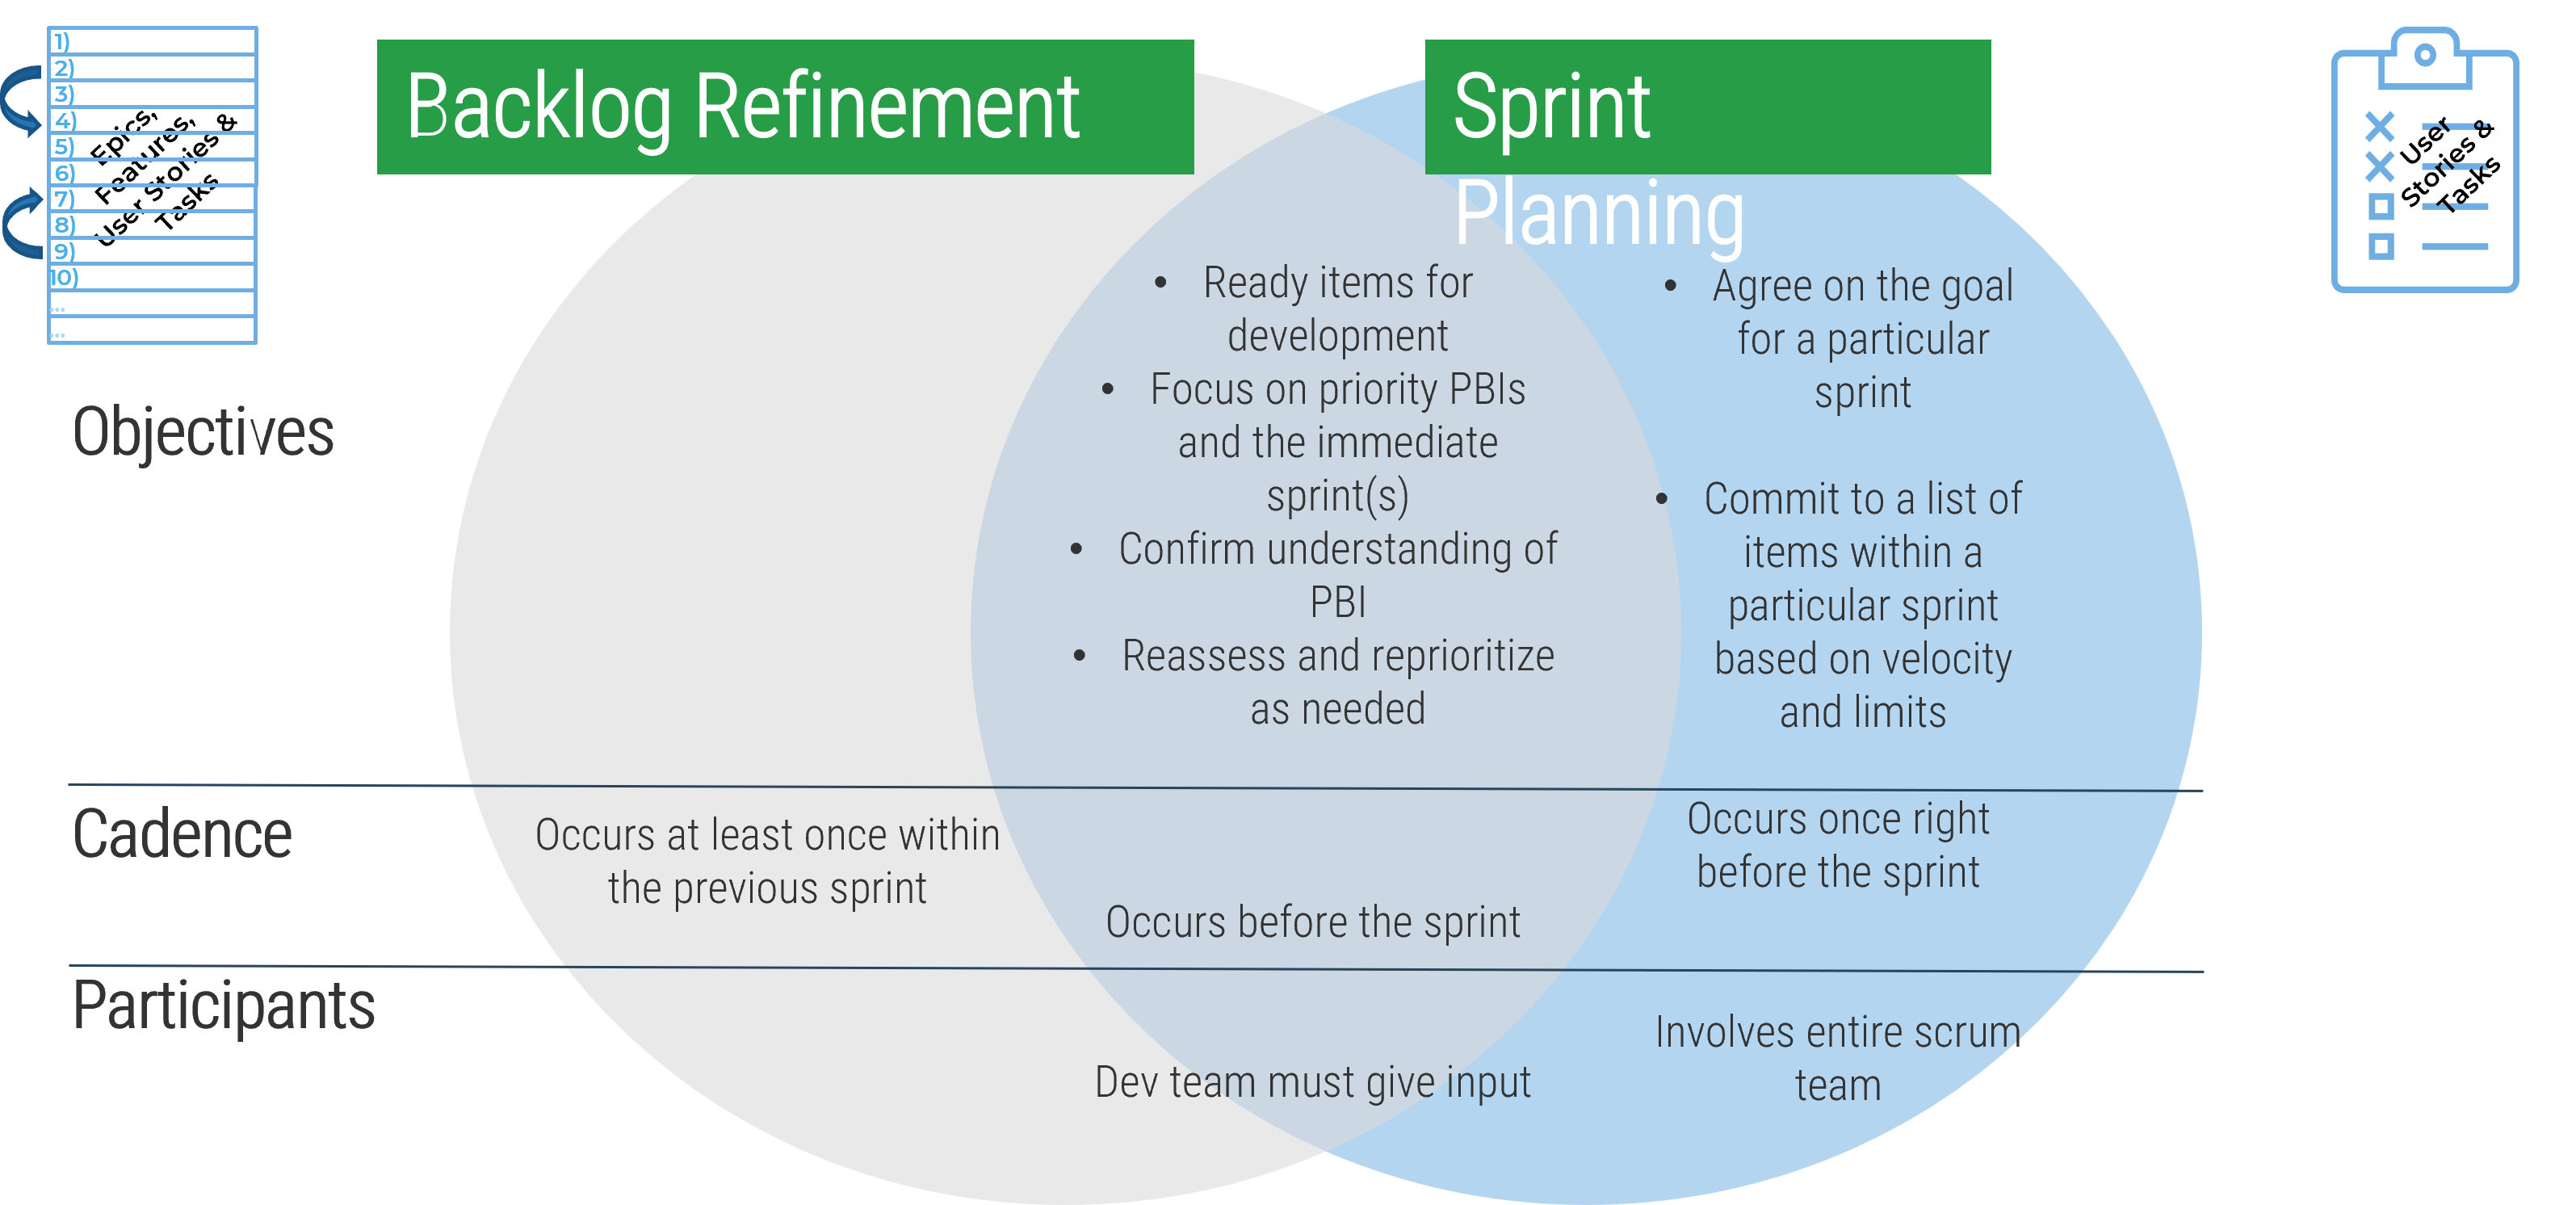 An image of a Venn diagram comparing Backlog Refinement to sprint Planning.